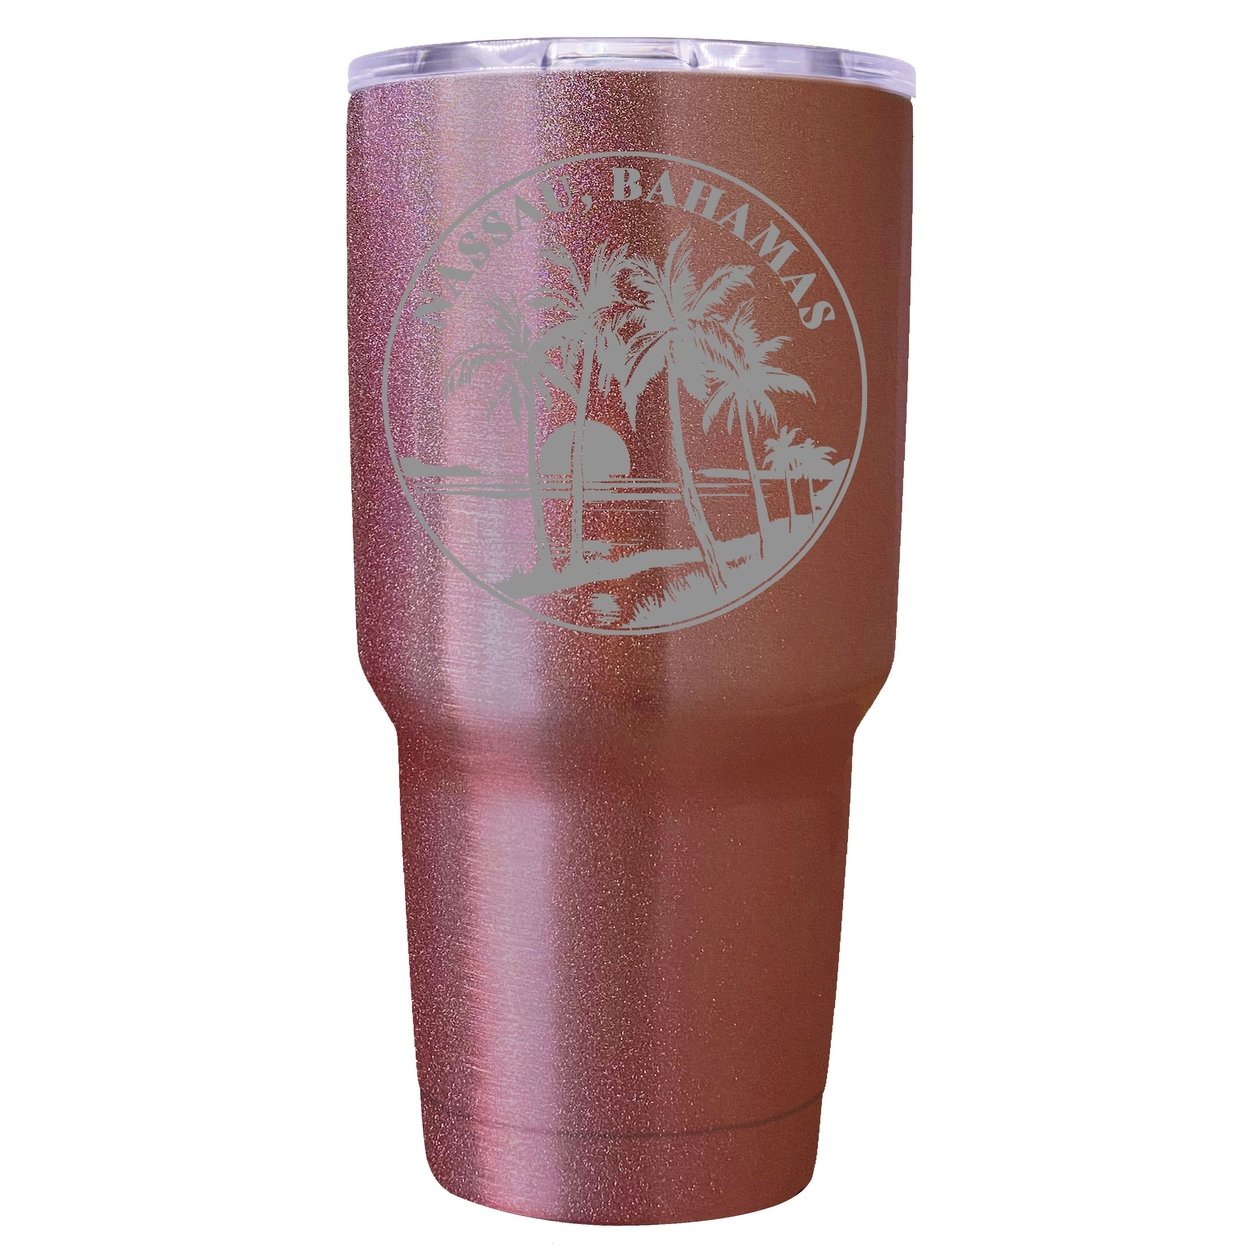 Nassau The Bahamas Souvenir 24 Oz Engraved Insulated Stainless Steel Tumbler - Coral,,4-Pack